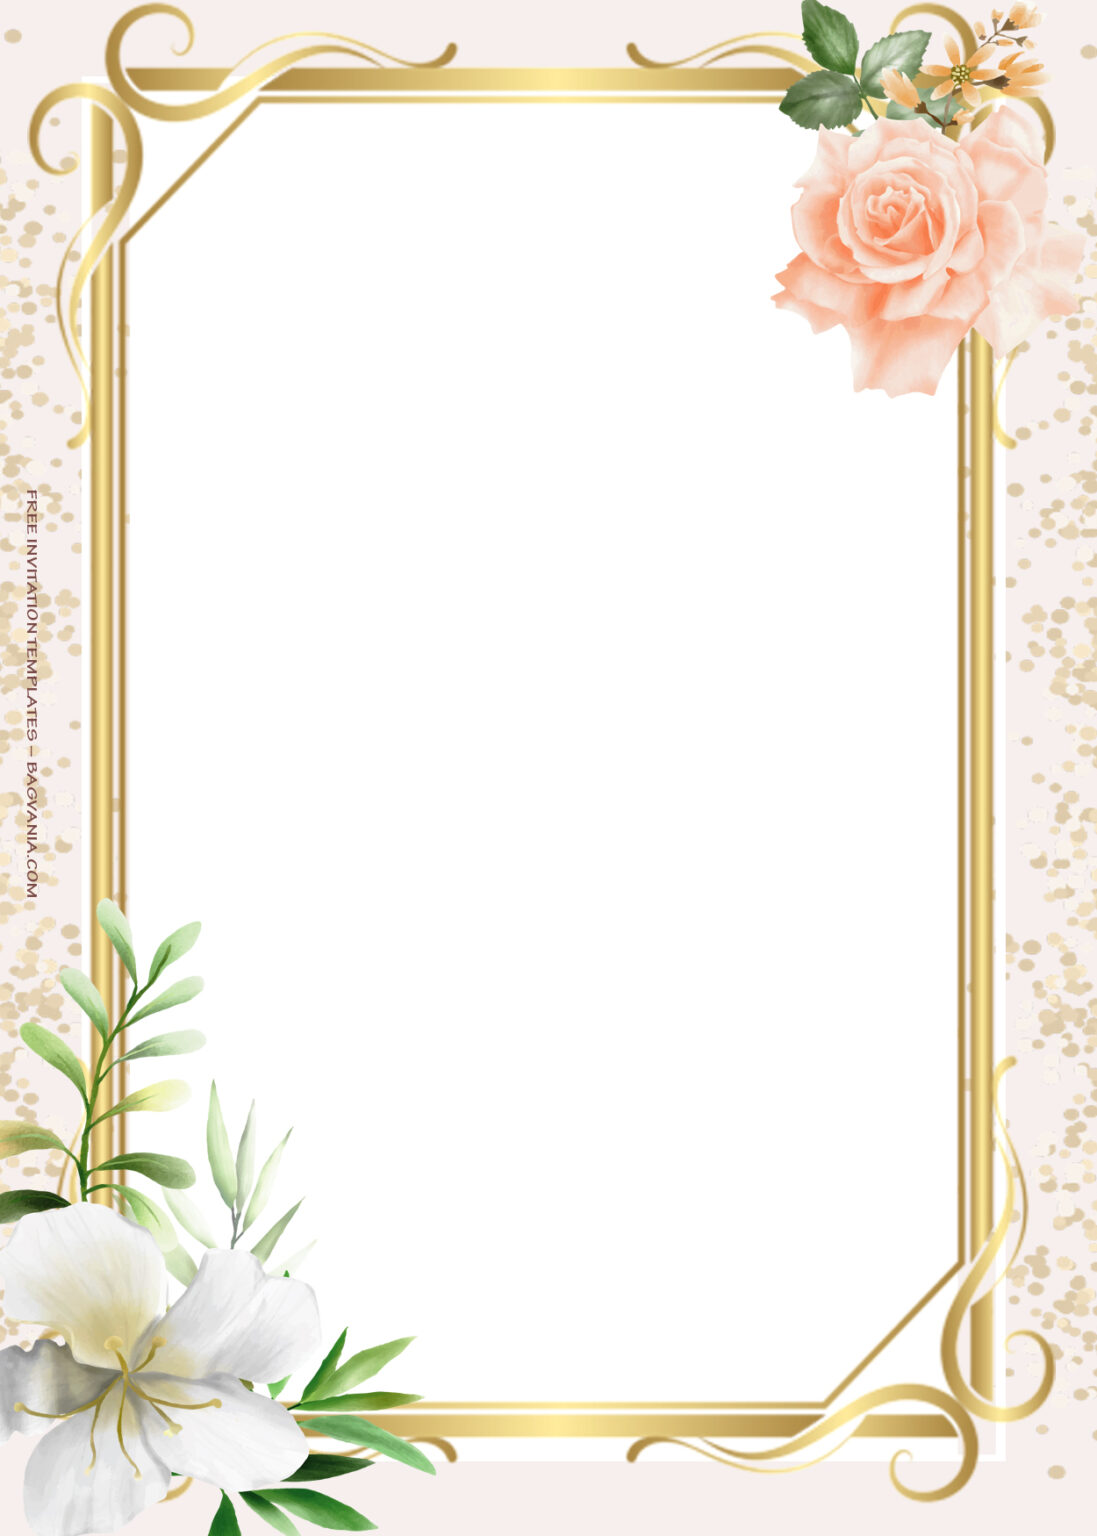 11+ Rose And Spring Gold Floral Wedding Invitation Templates | FREE ...